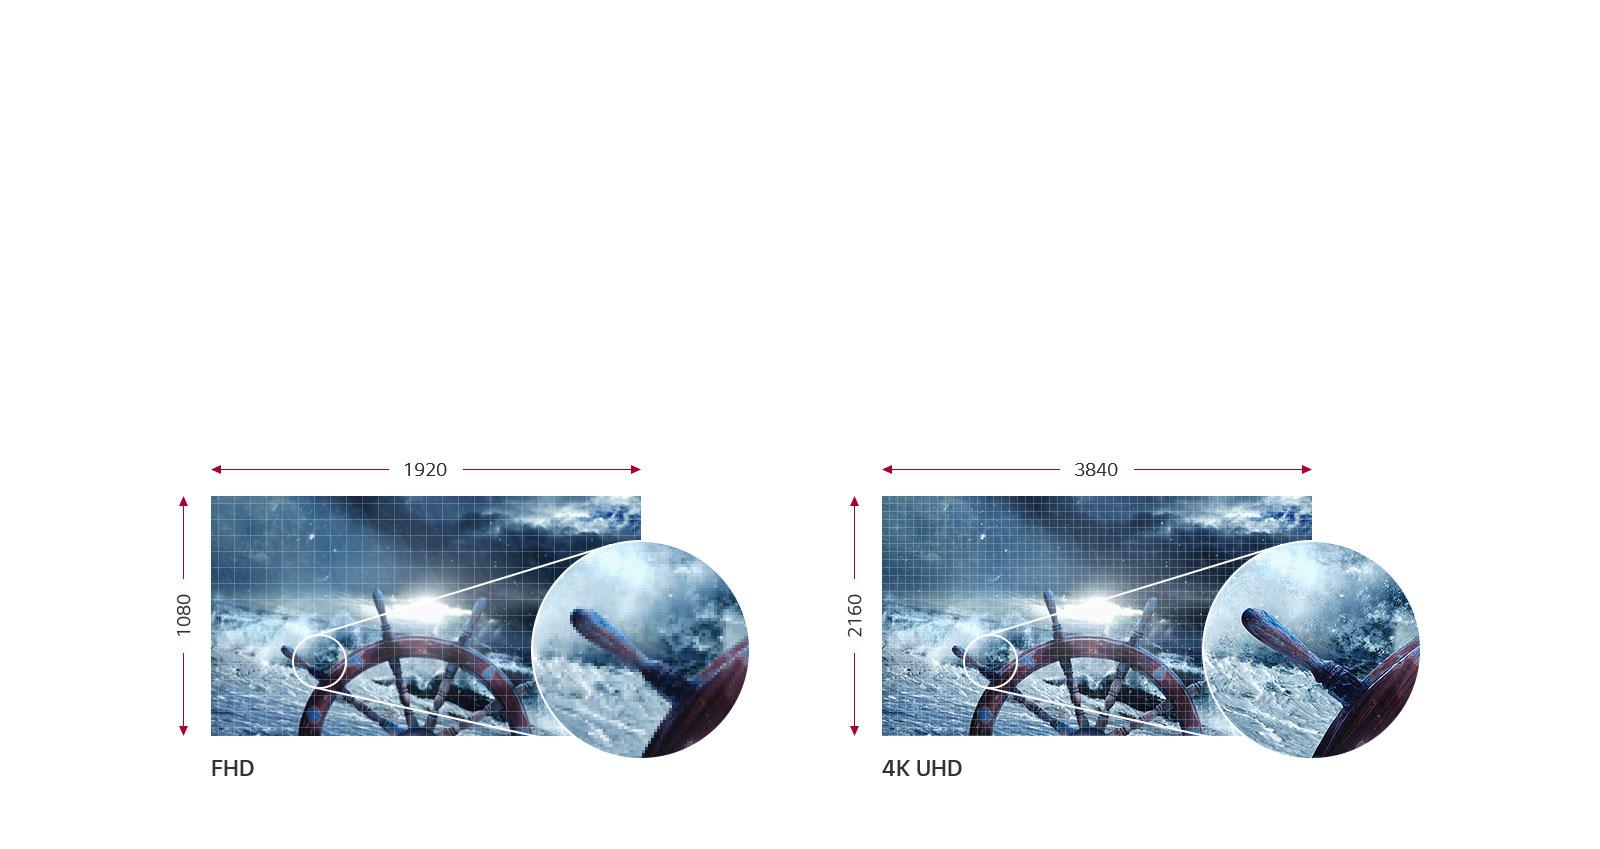 Side-by-side graphics detailing resolution in pixels. The 4K UHD image is more detailed. FHD resolution is 1920 x 1080. 4K UHD resolution is 3840 x 2160.